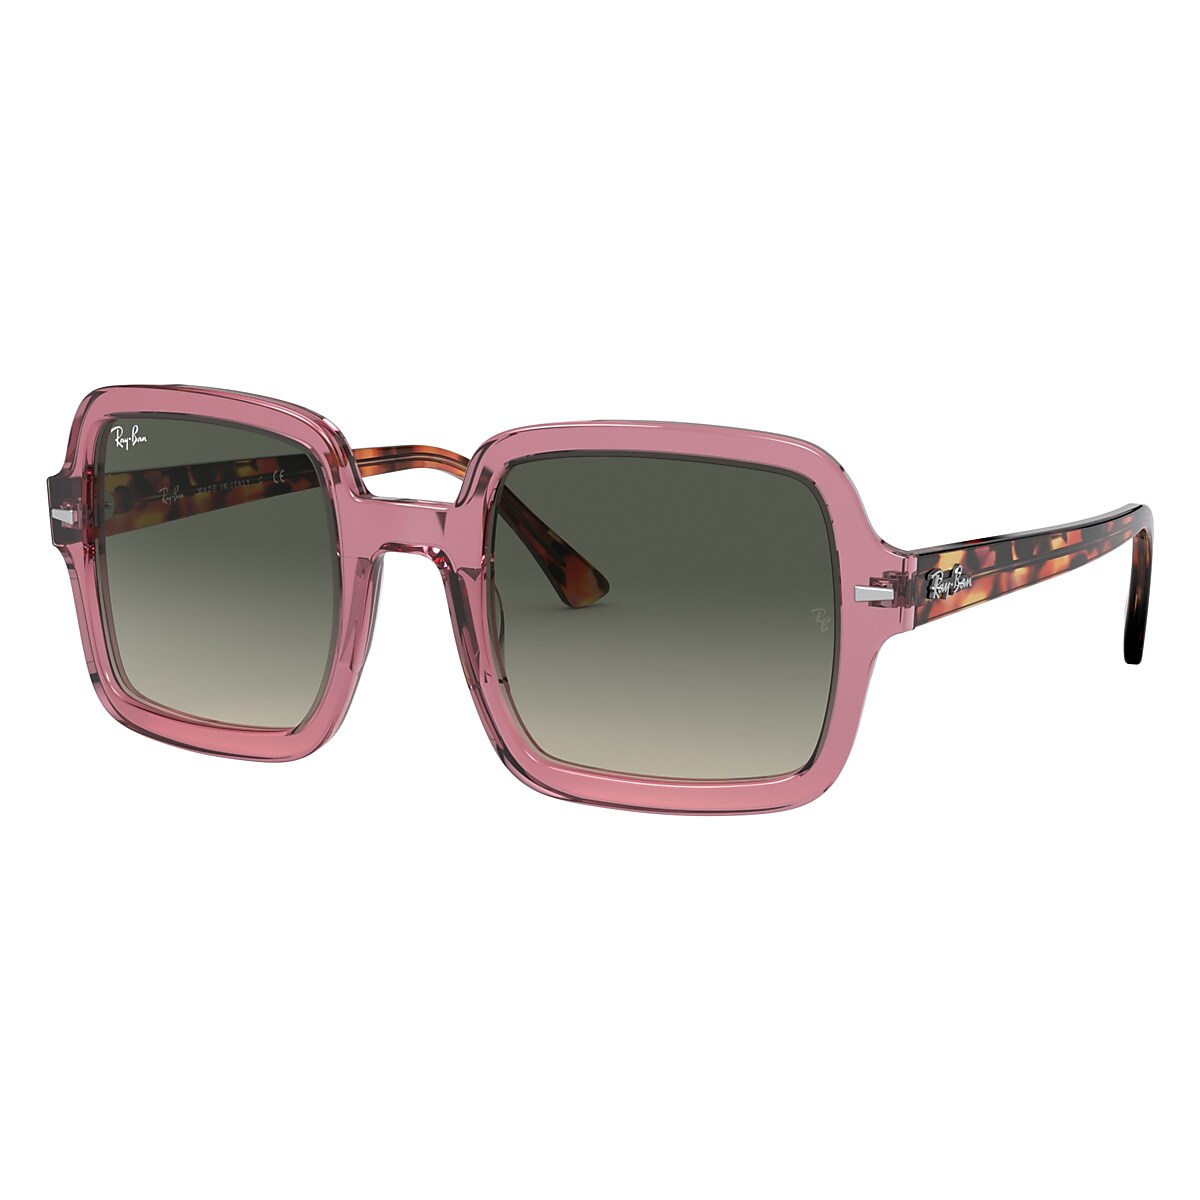 Rb2188 Sunglasses in Transparent Violet and Grey | Ray-Ban®